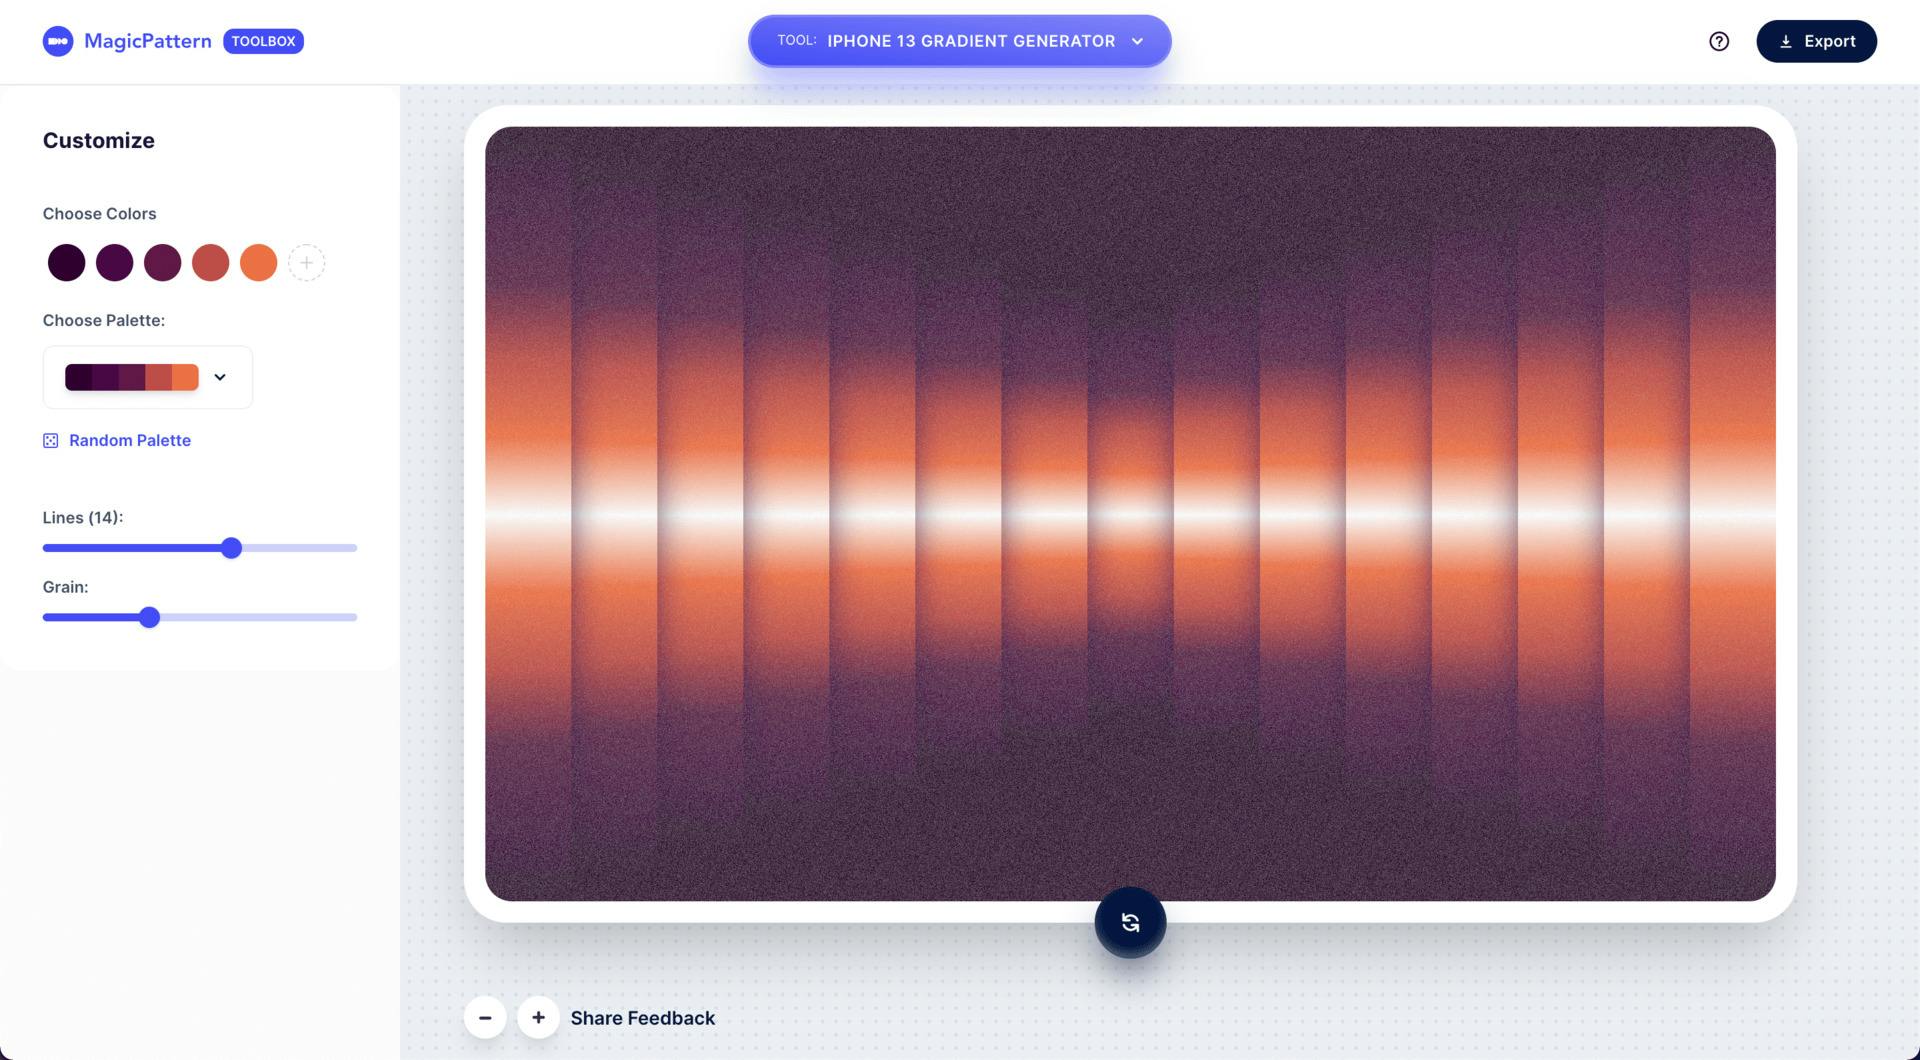 iPhone 13 Gradient Generator – By the MagicPattern design toolbox